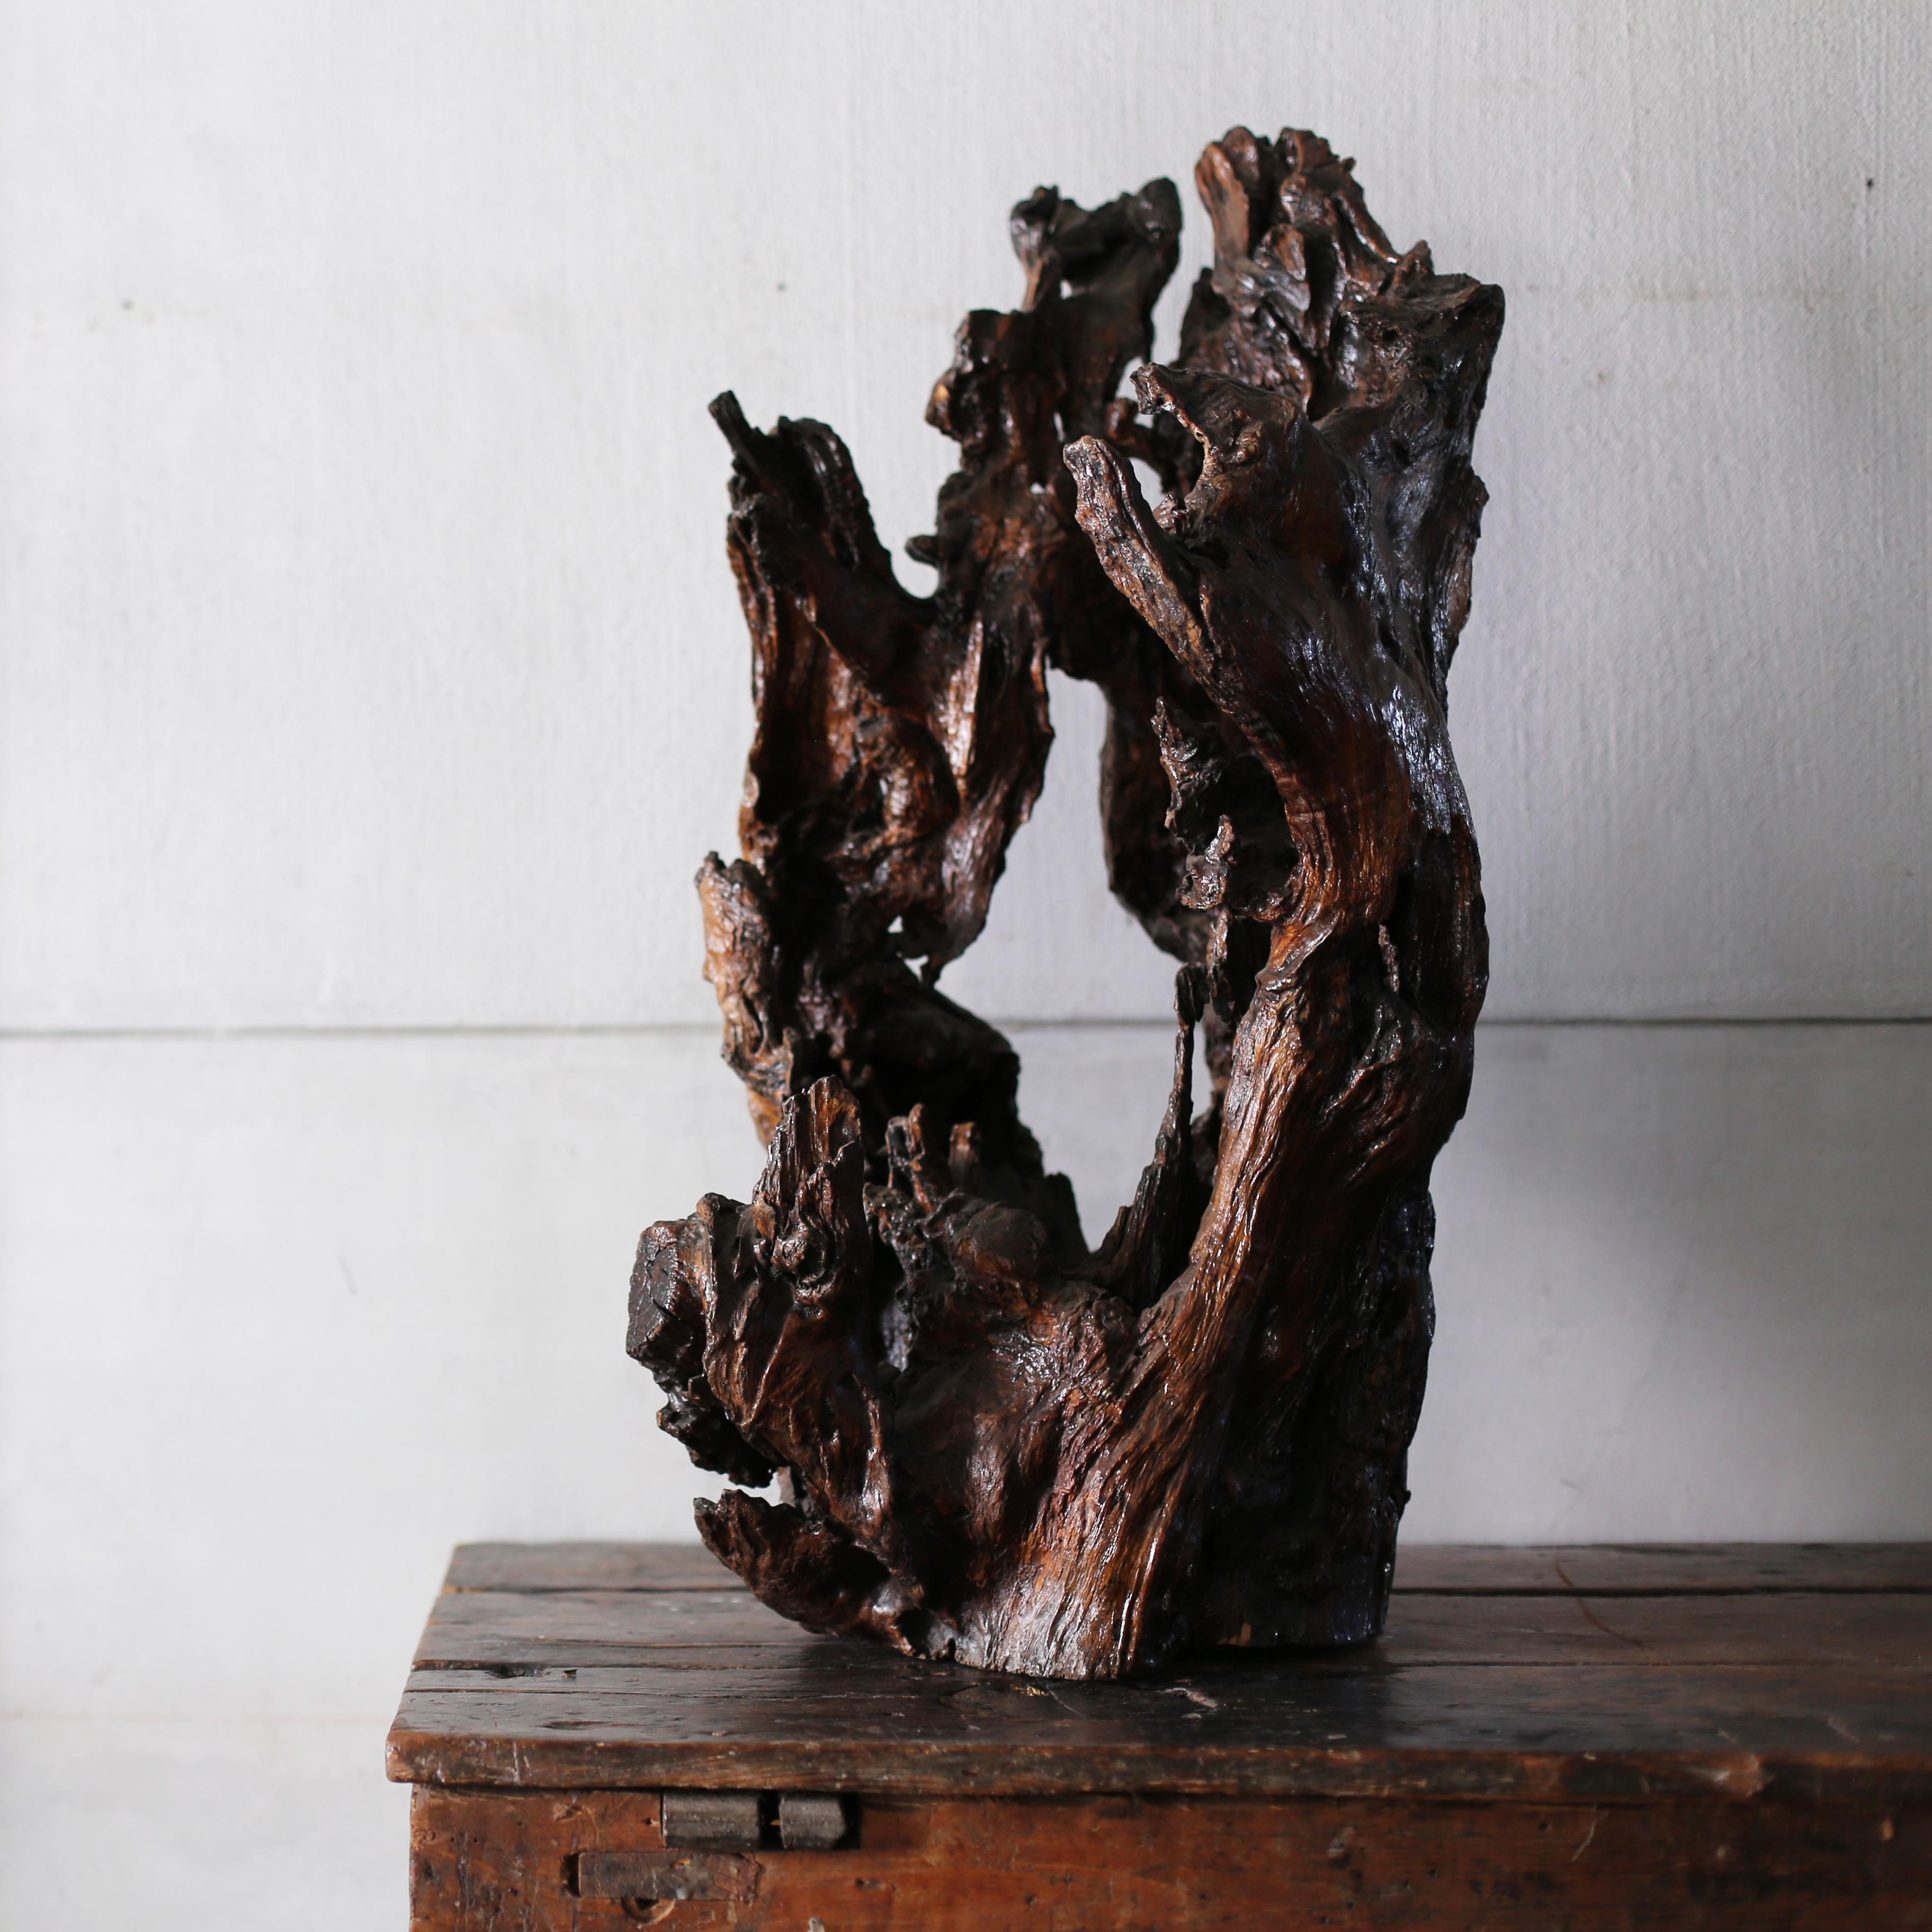 This is a tree root, a natural wood object.
We Japanese have a culture of displaying natural wood for ornamental purposes since ancient times.
This natural wood object is old and magnificent.
Even today, beautiful old natural wood objects are highly